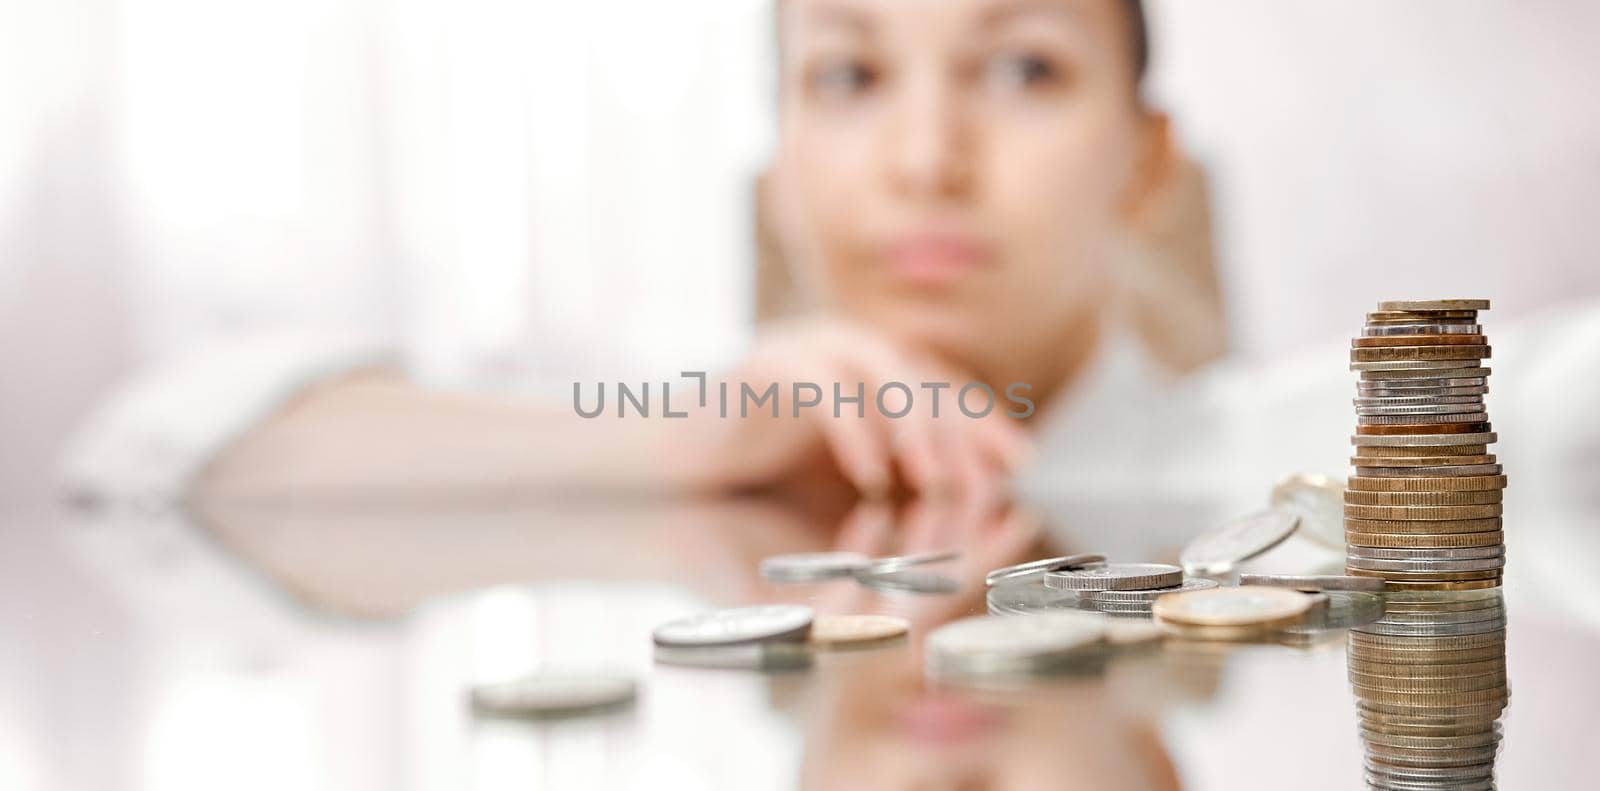 A woman looks thoughtfully at a fallen stack of coins on a mirrored table . High quality photo